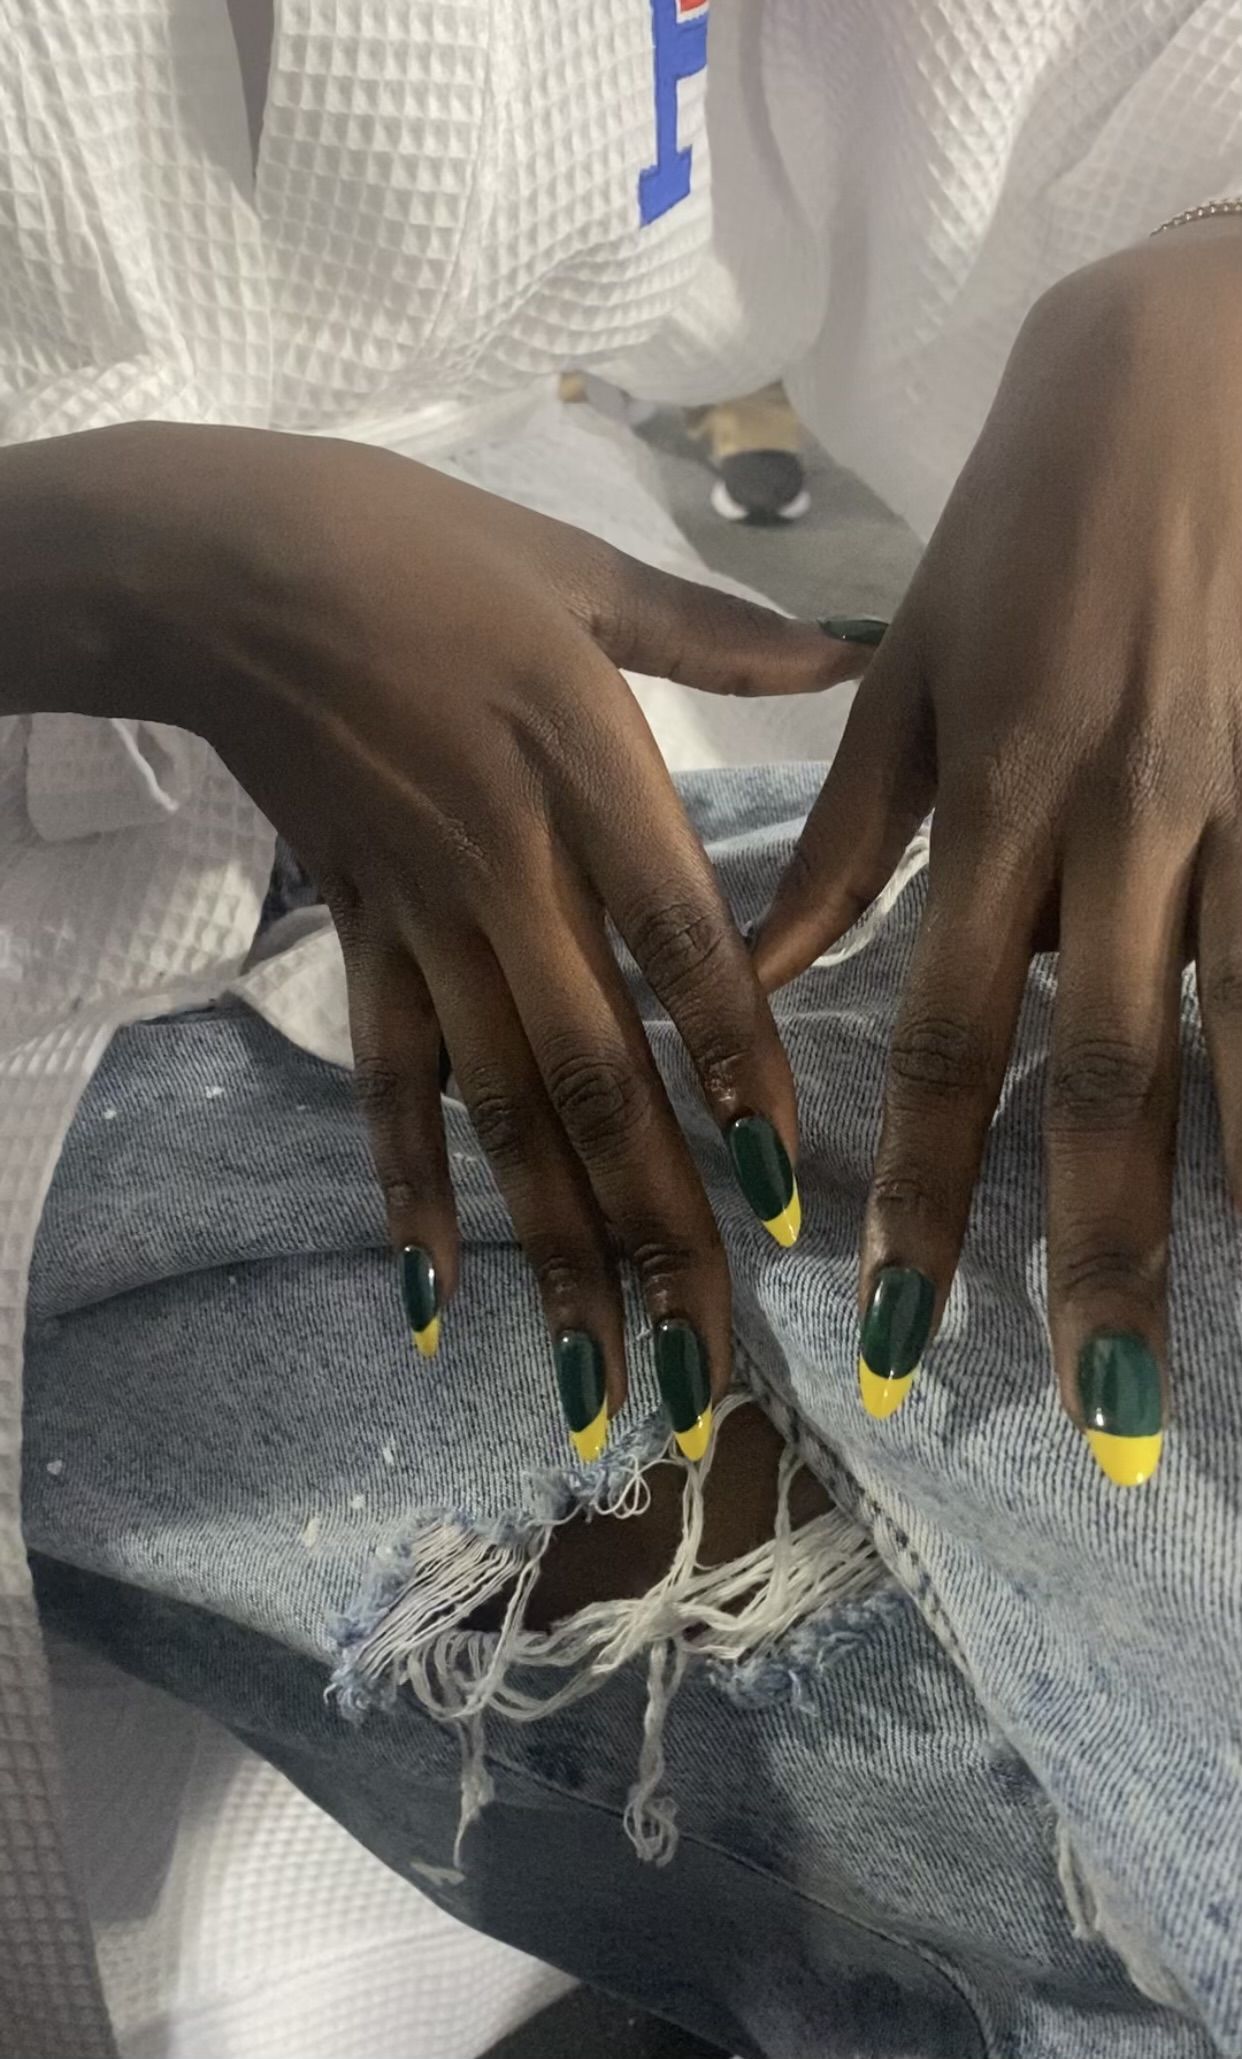 The Best Nail Trends of 2023, According to Nail Artists — See